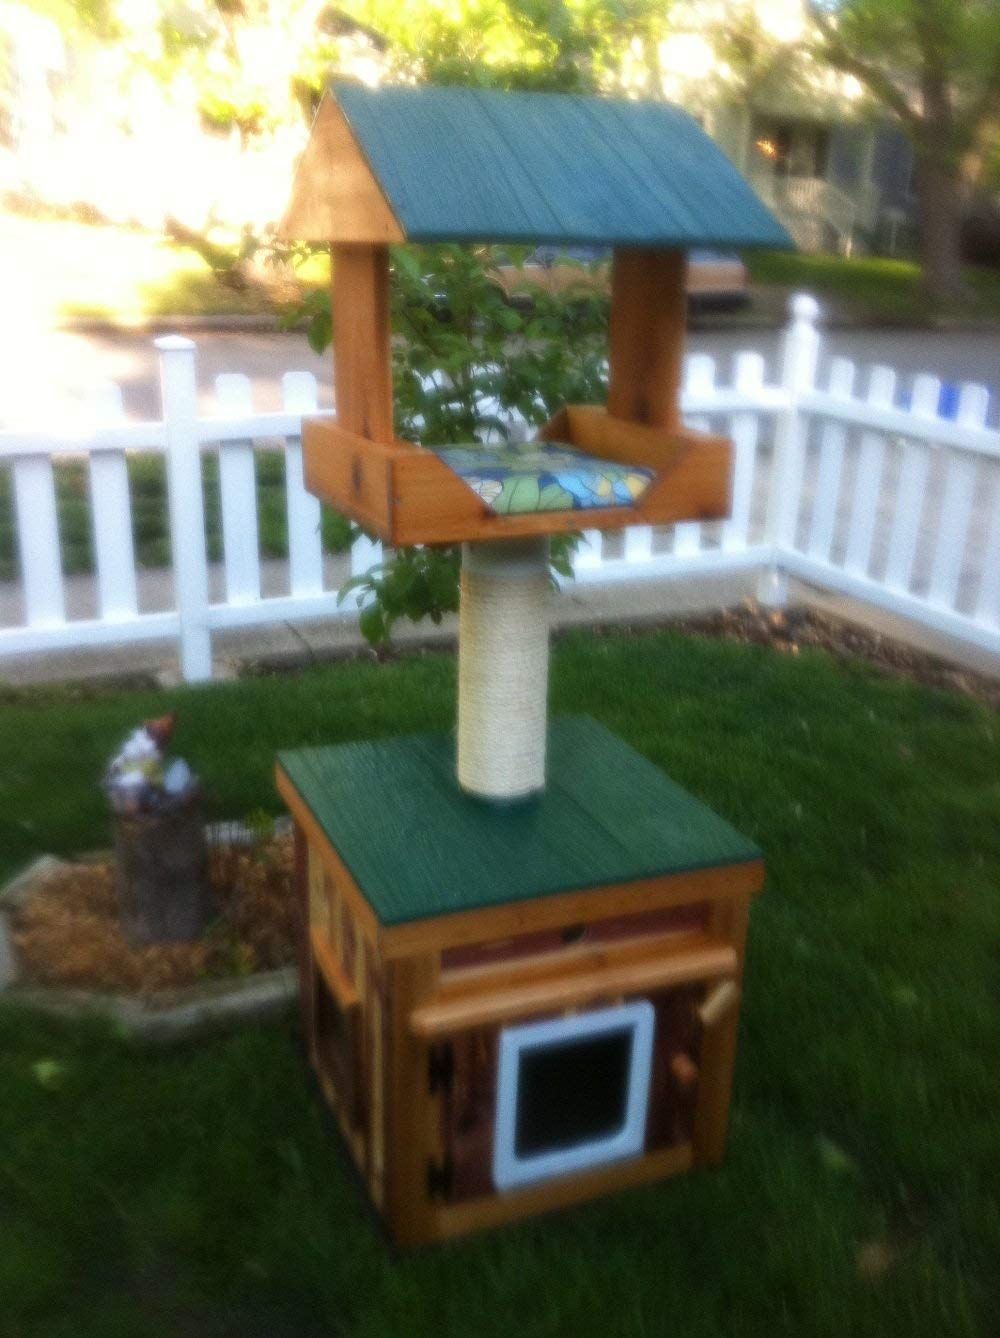 Outdoor cat house in yard